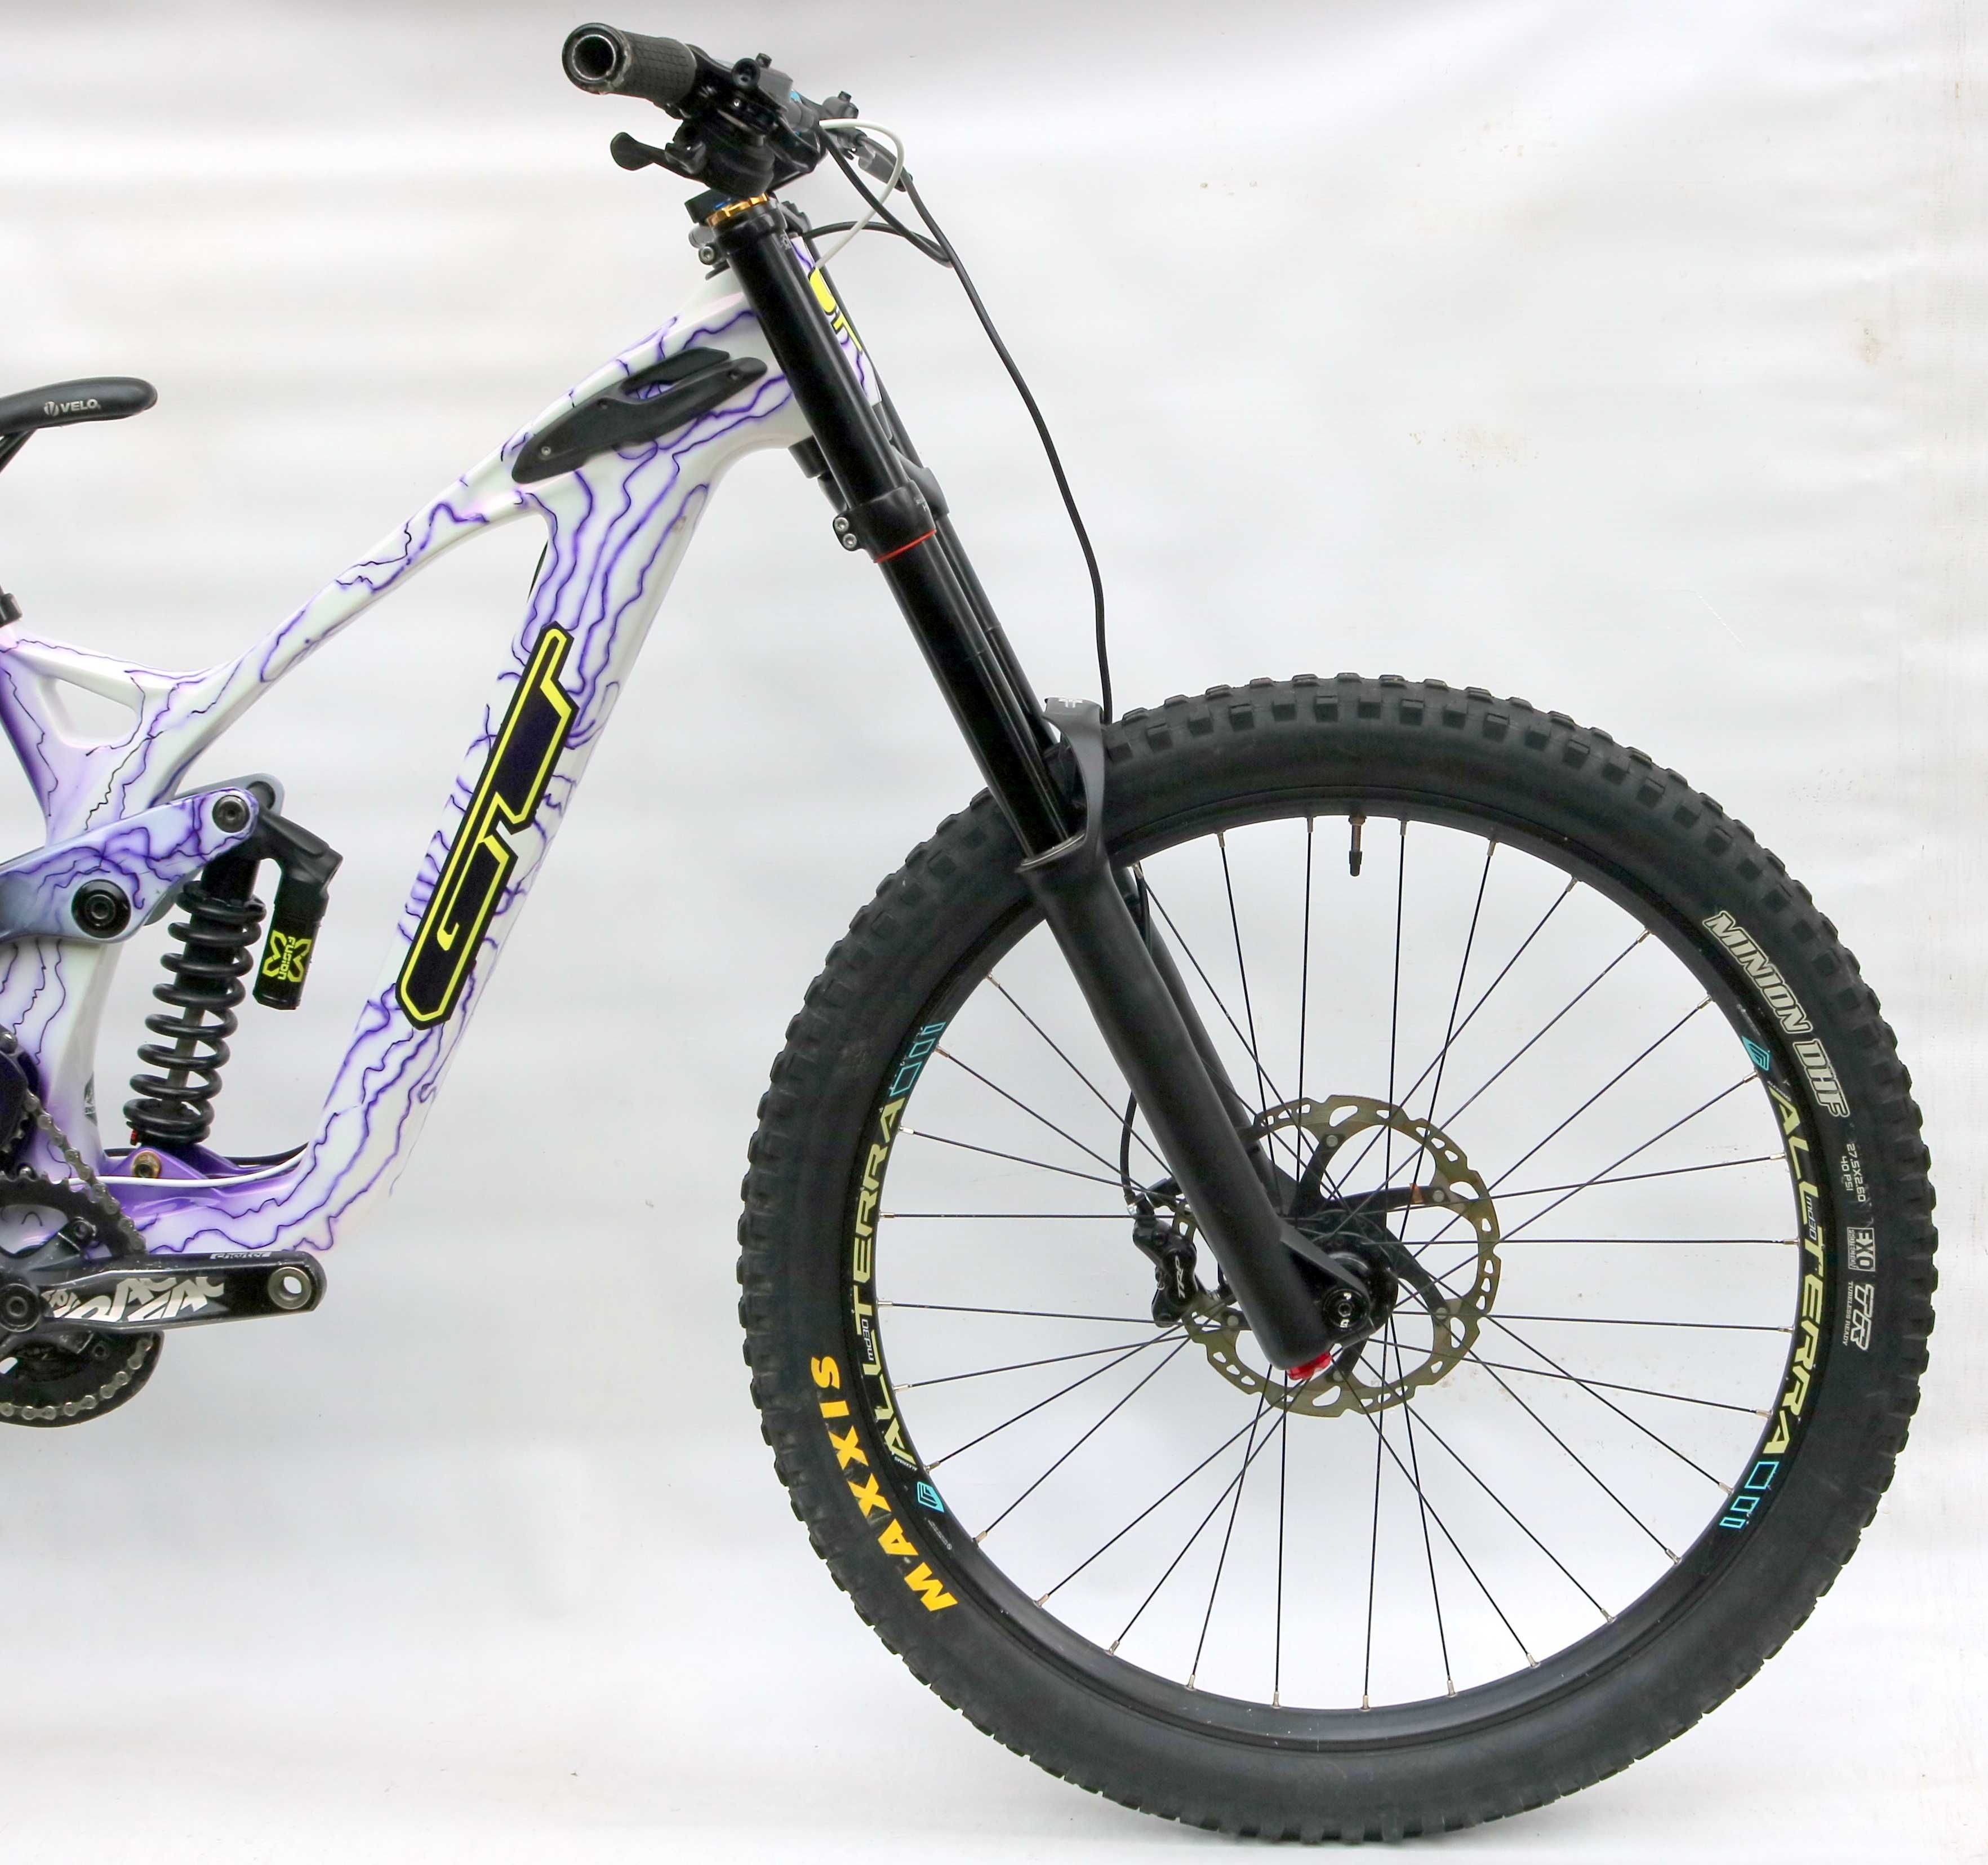 Rower zjazdowy DH GT FURY EXPERT CARBON 27,5, ZEE, X FUSION 2019r.